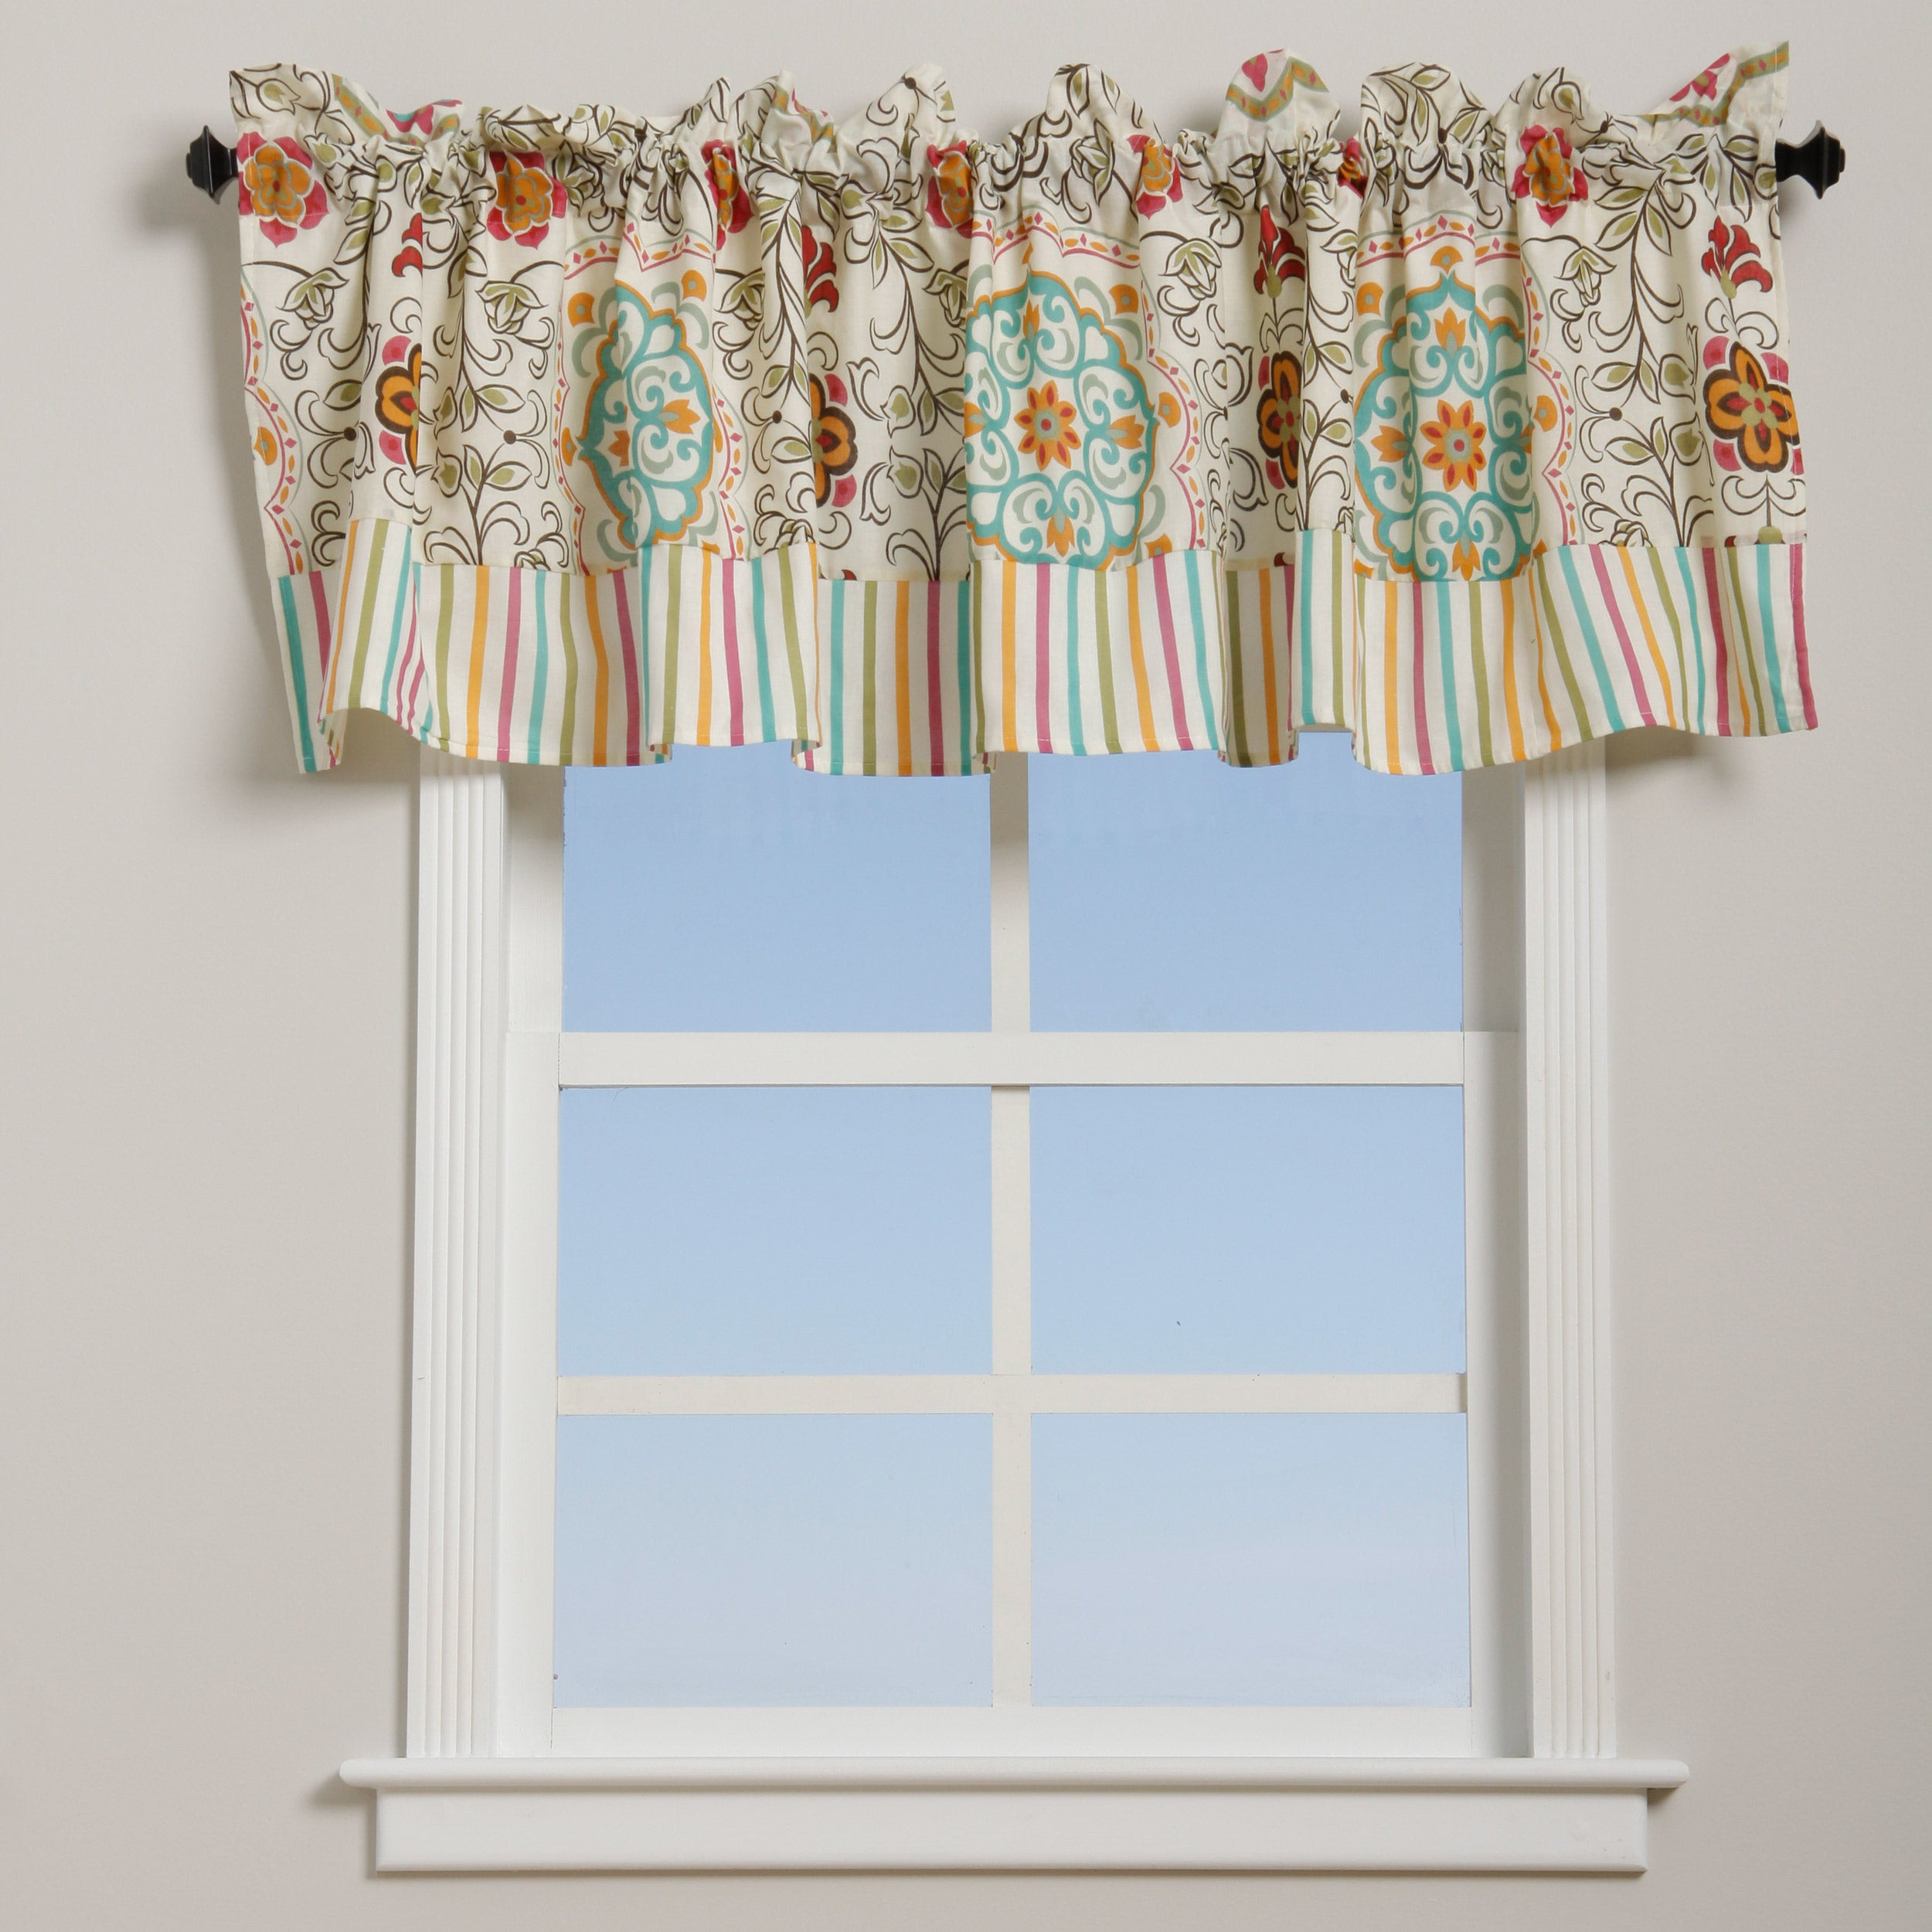 Overstock Kitchen Curtains
 Esprit Spice Floral and Striped Cotton Window Valance